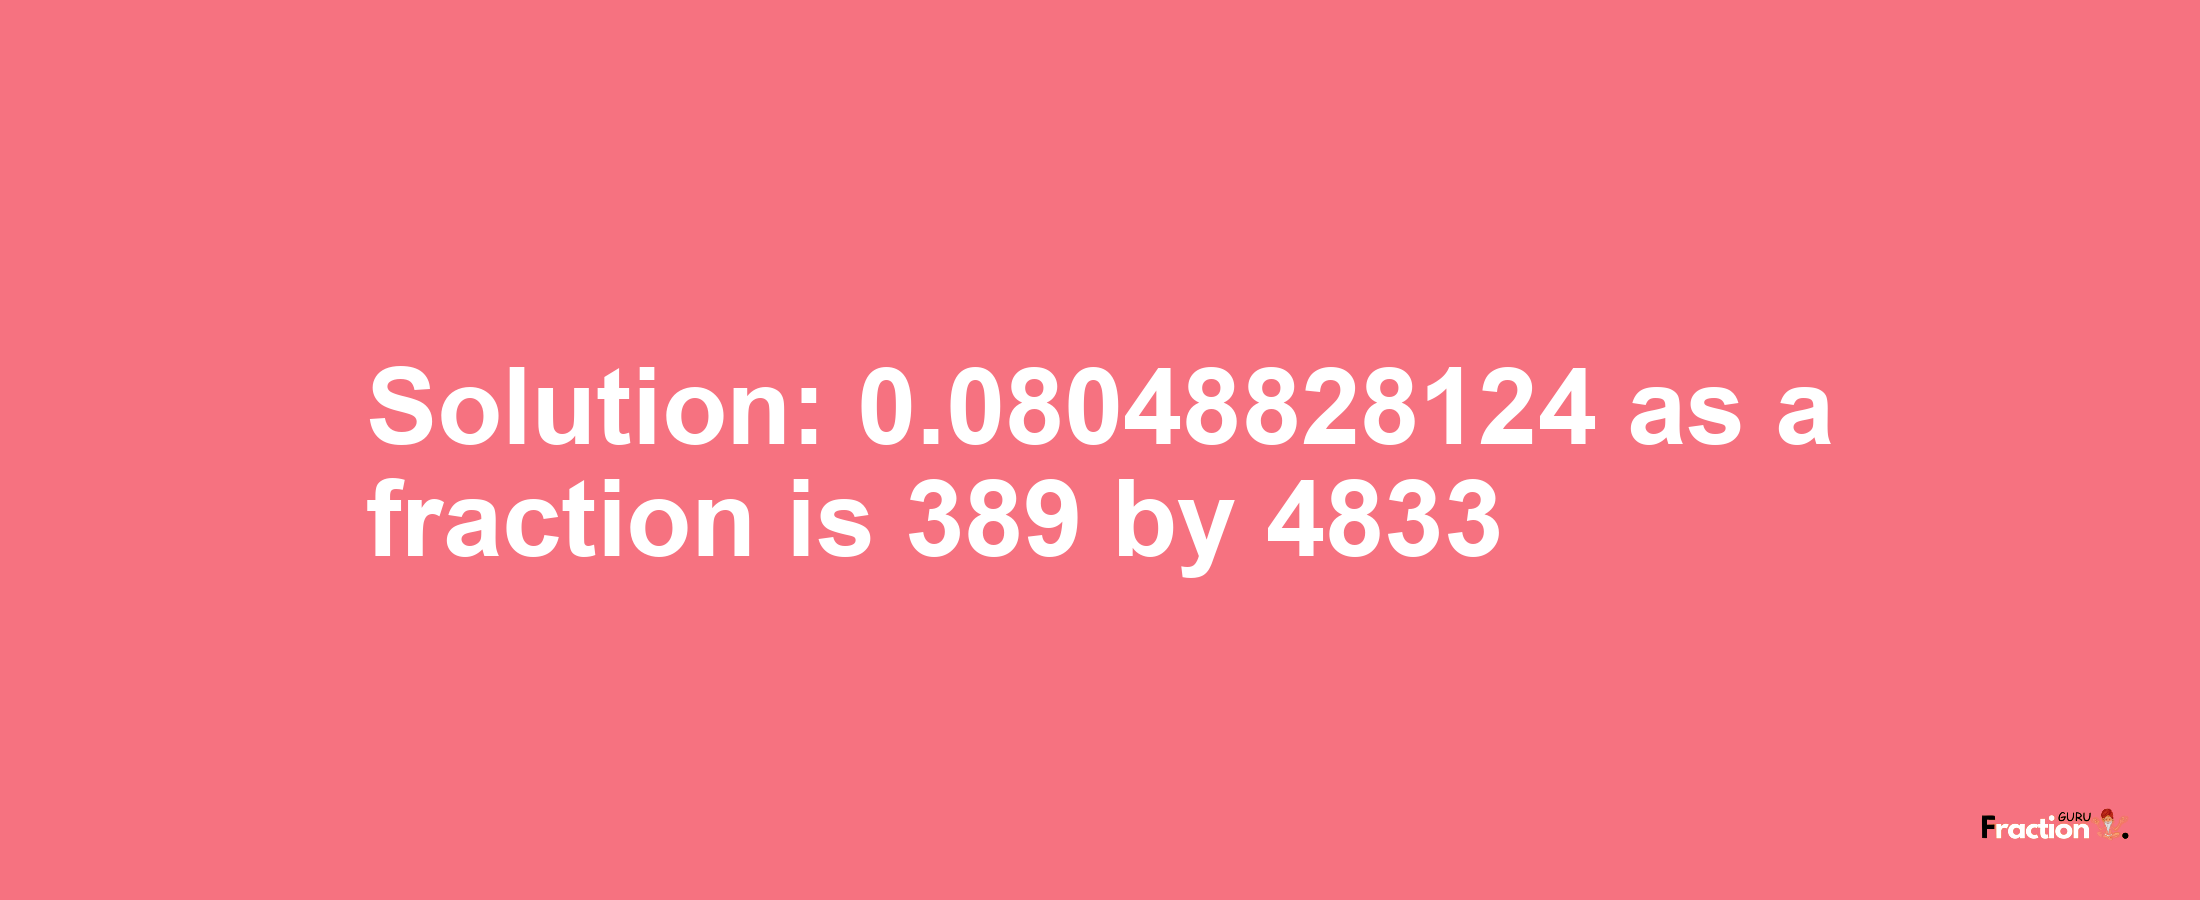 Solution:0.08048828124 as a fraction is 389/4833